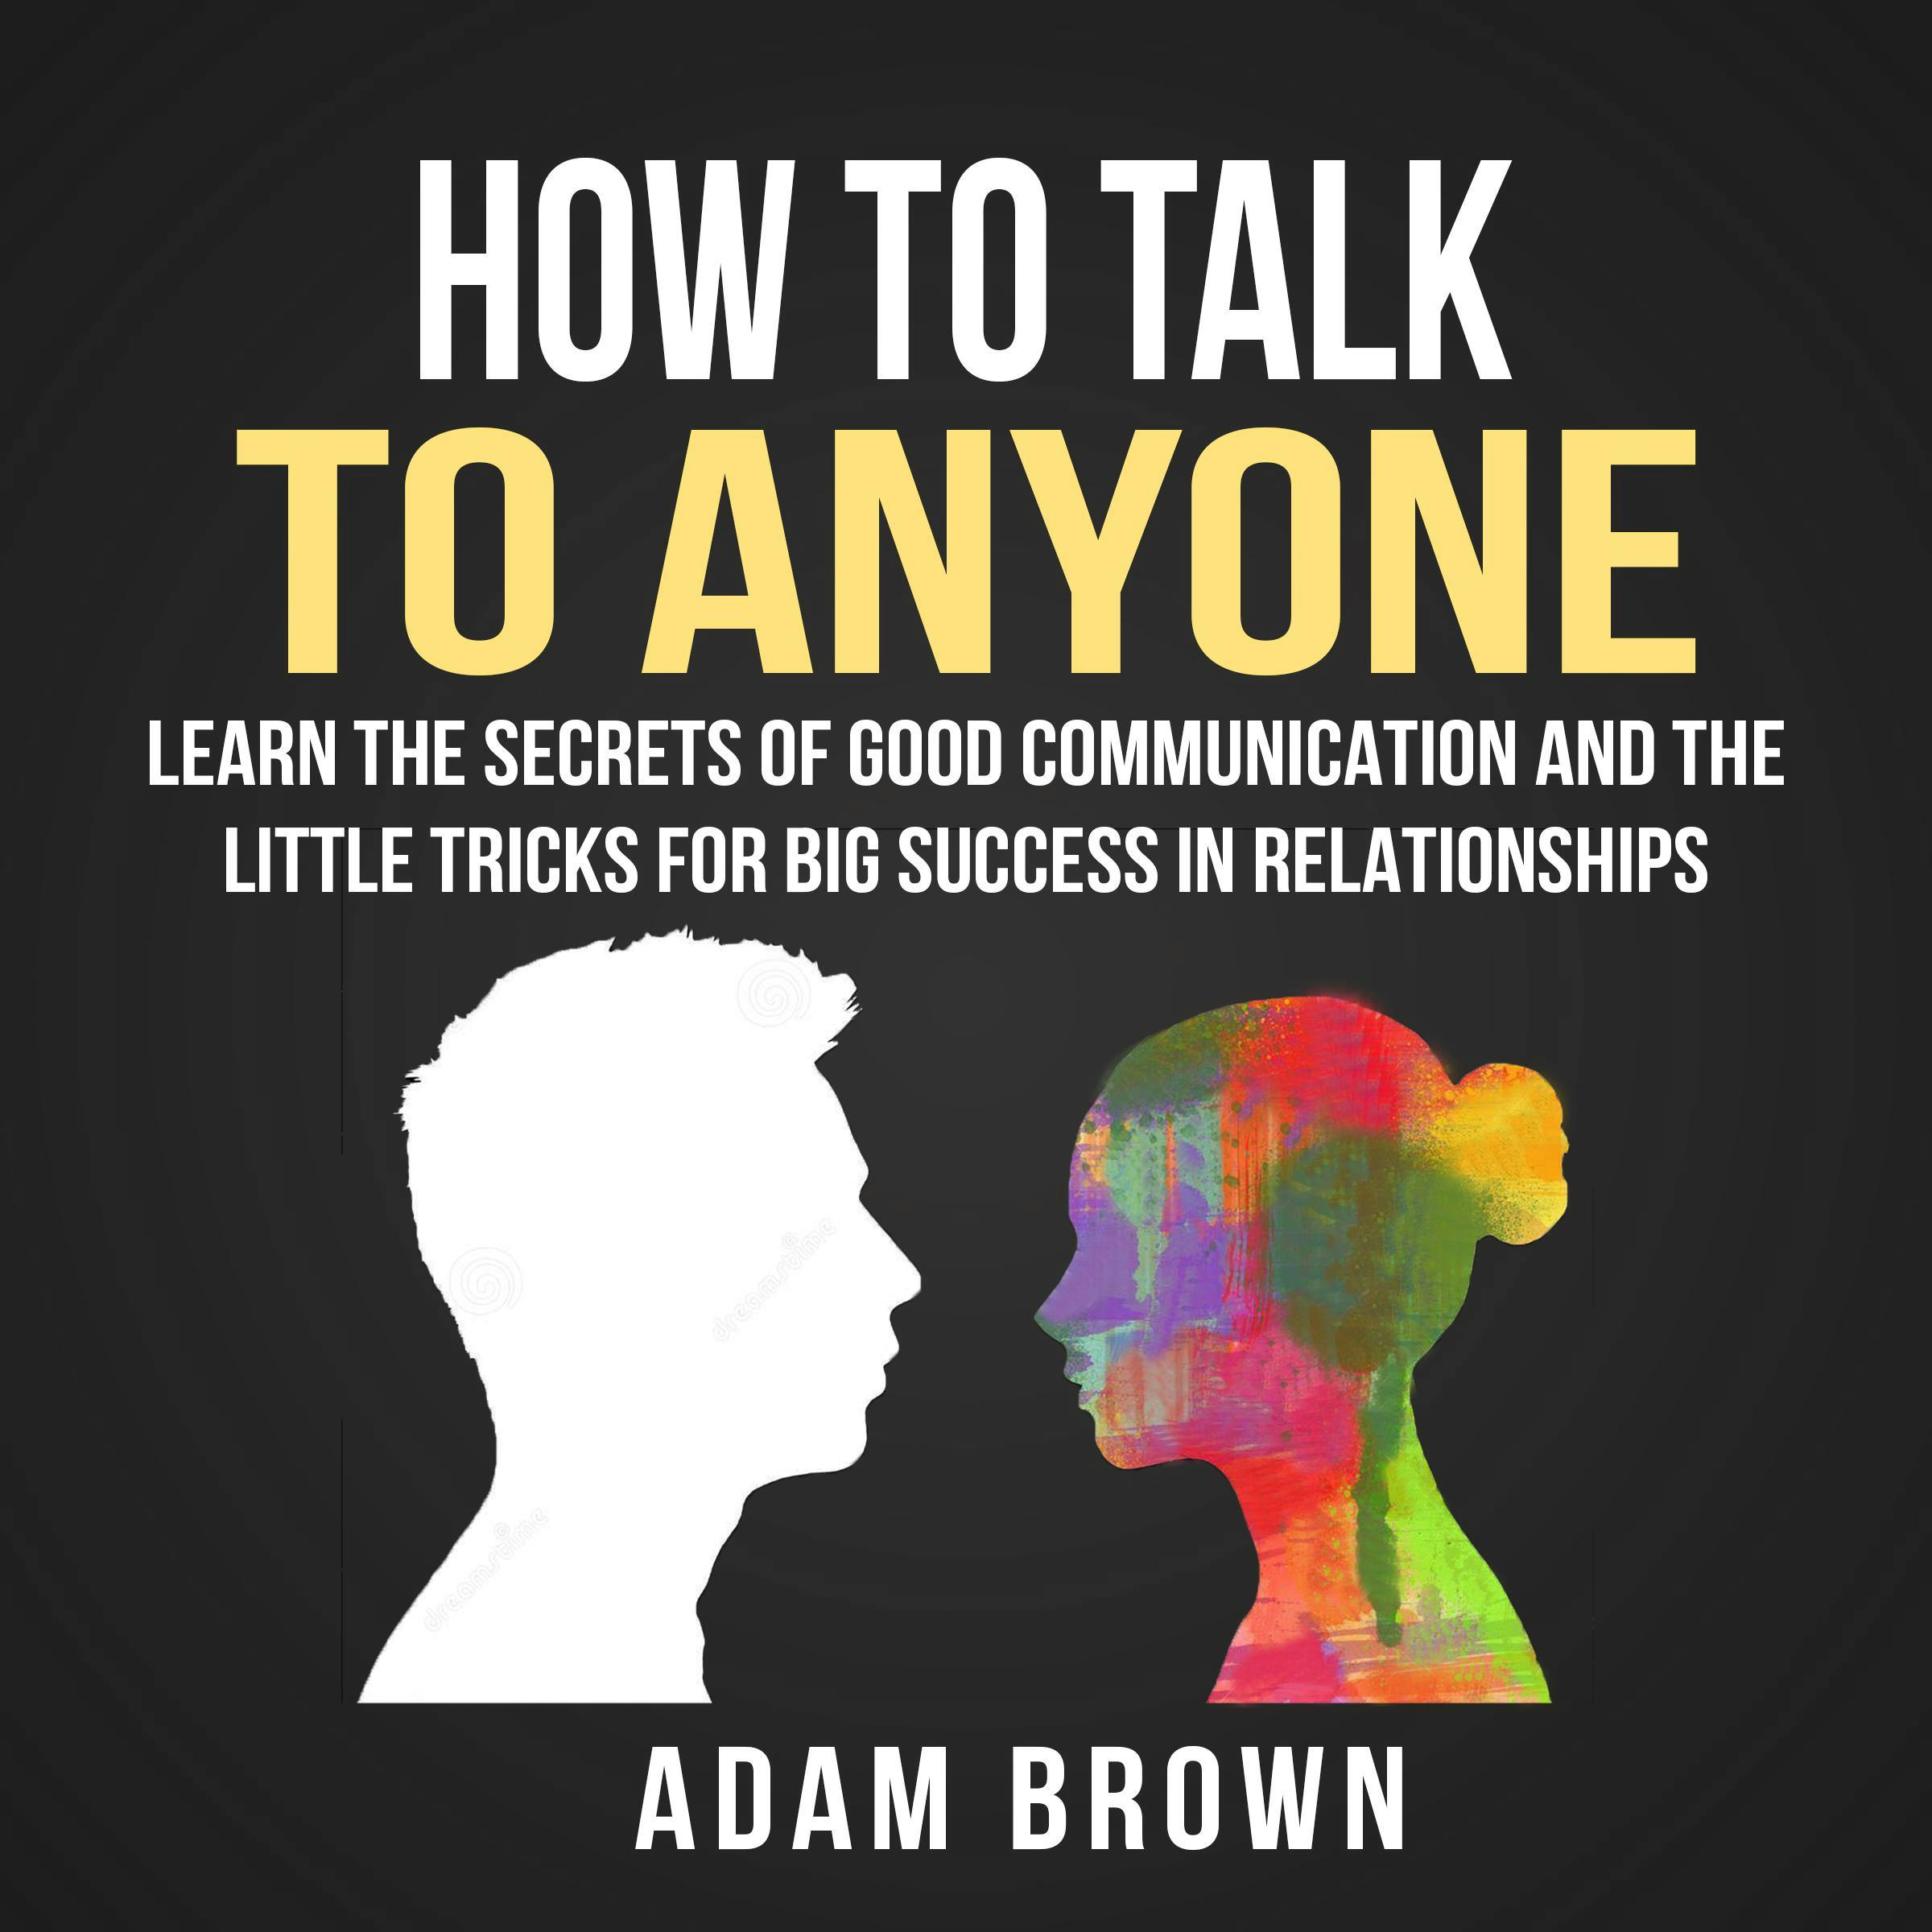 How to Talk to Anyone: Learn the Secrets of Good Communication and the Little Tricks for Big Success in Relationship - Adam Brown